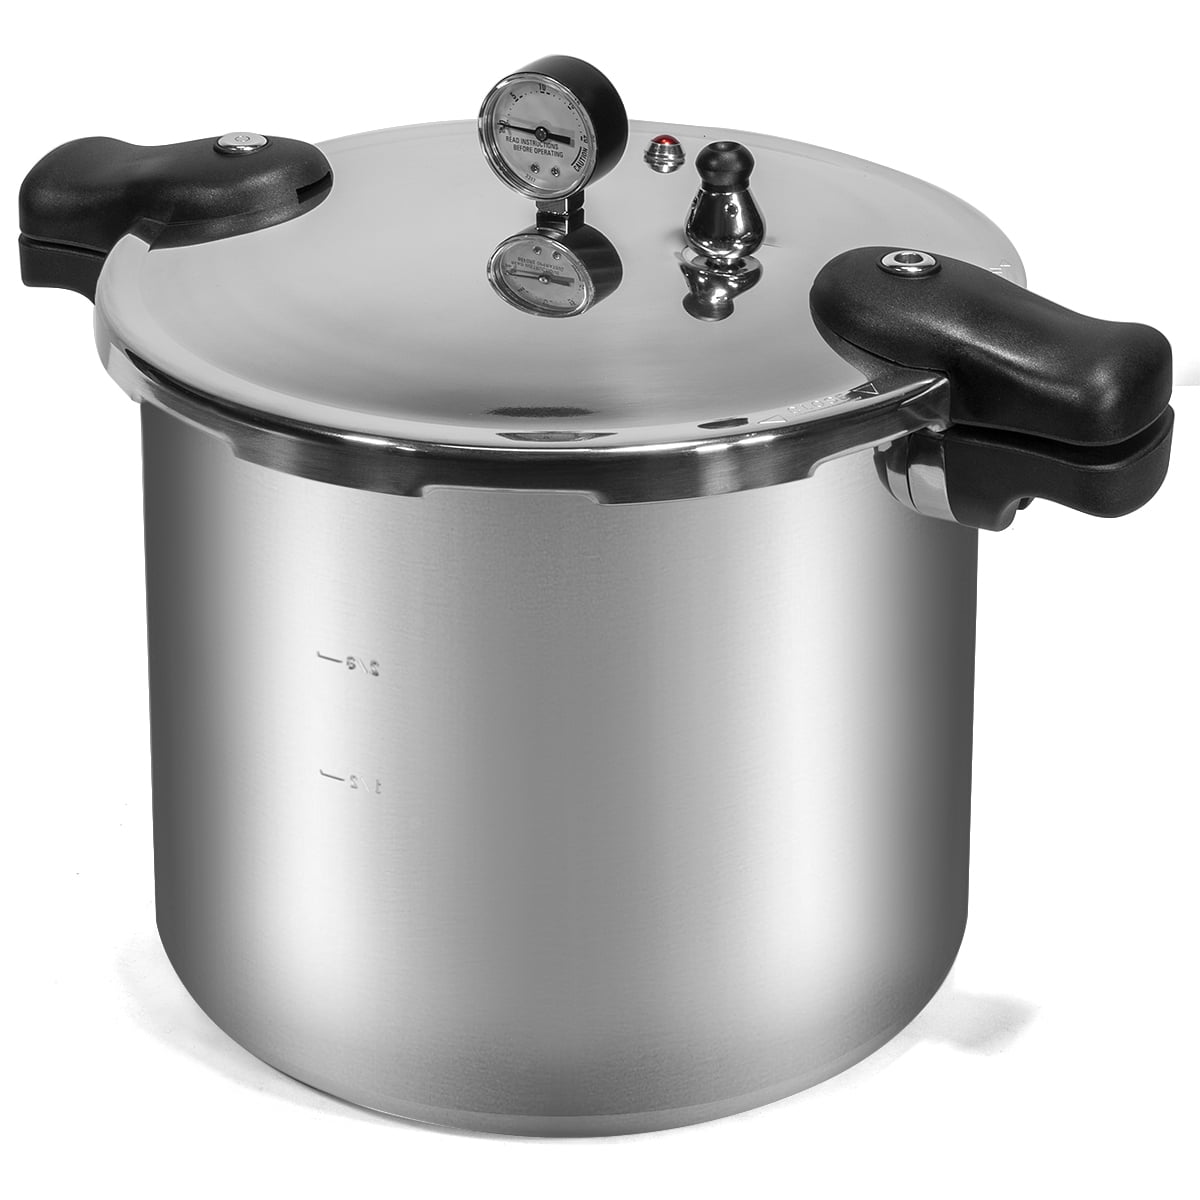 Presto 01781 23-Quart Pressure Canner and Cooker BRAND NEW IN HAND SHIPS NOW 